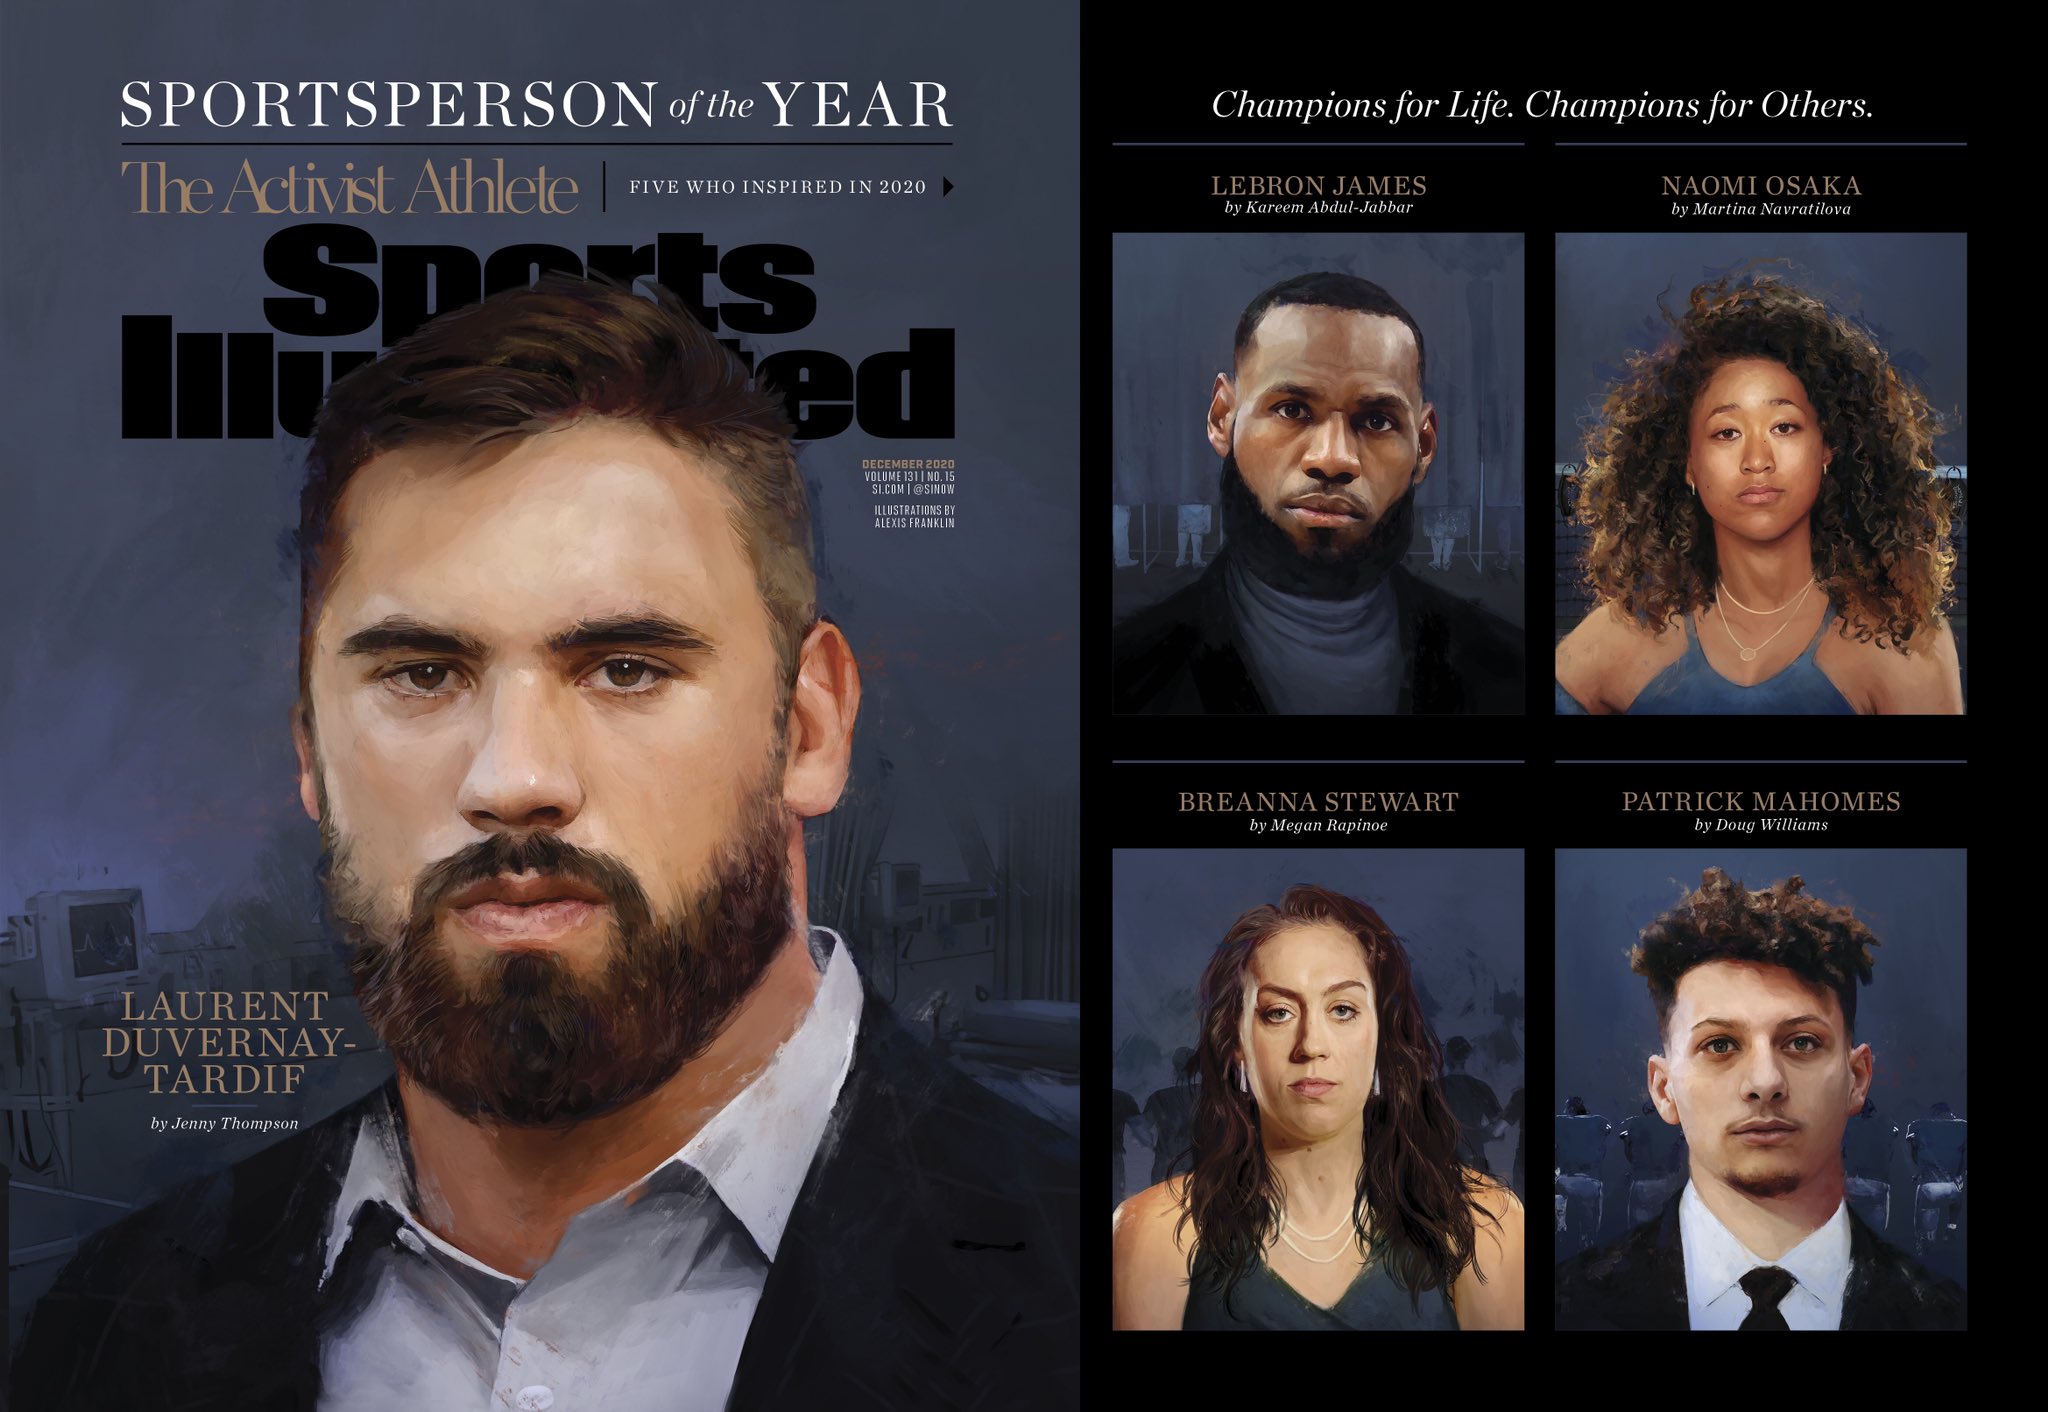 Laurent Duvernay-Tardif sports illustrated sportsperson of the year